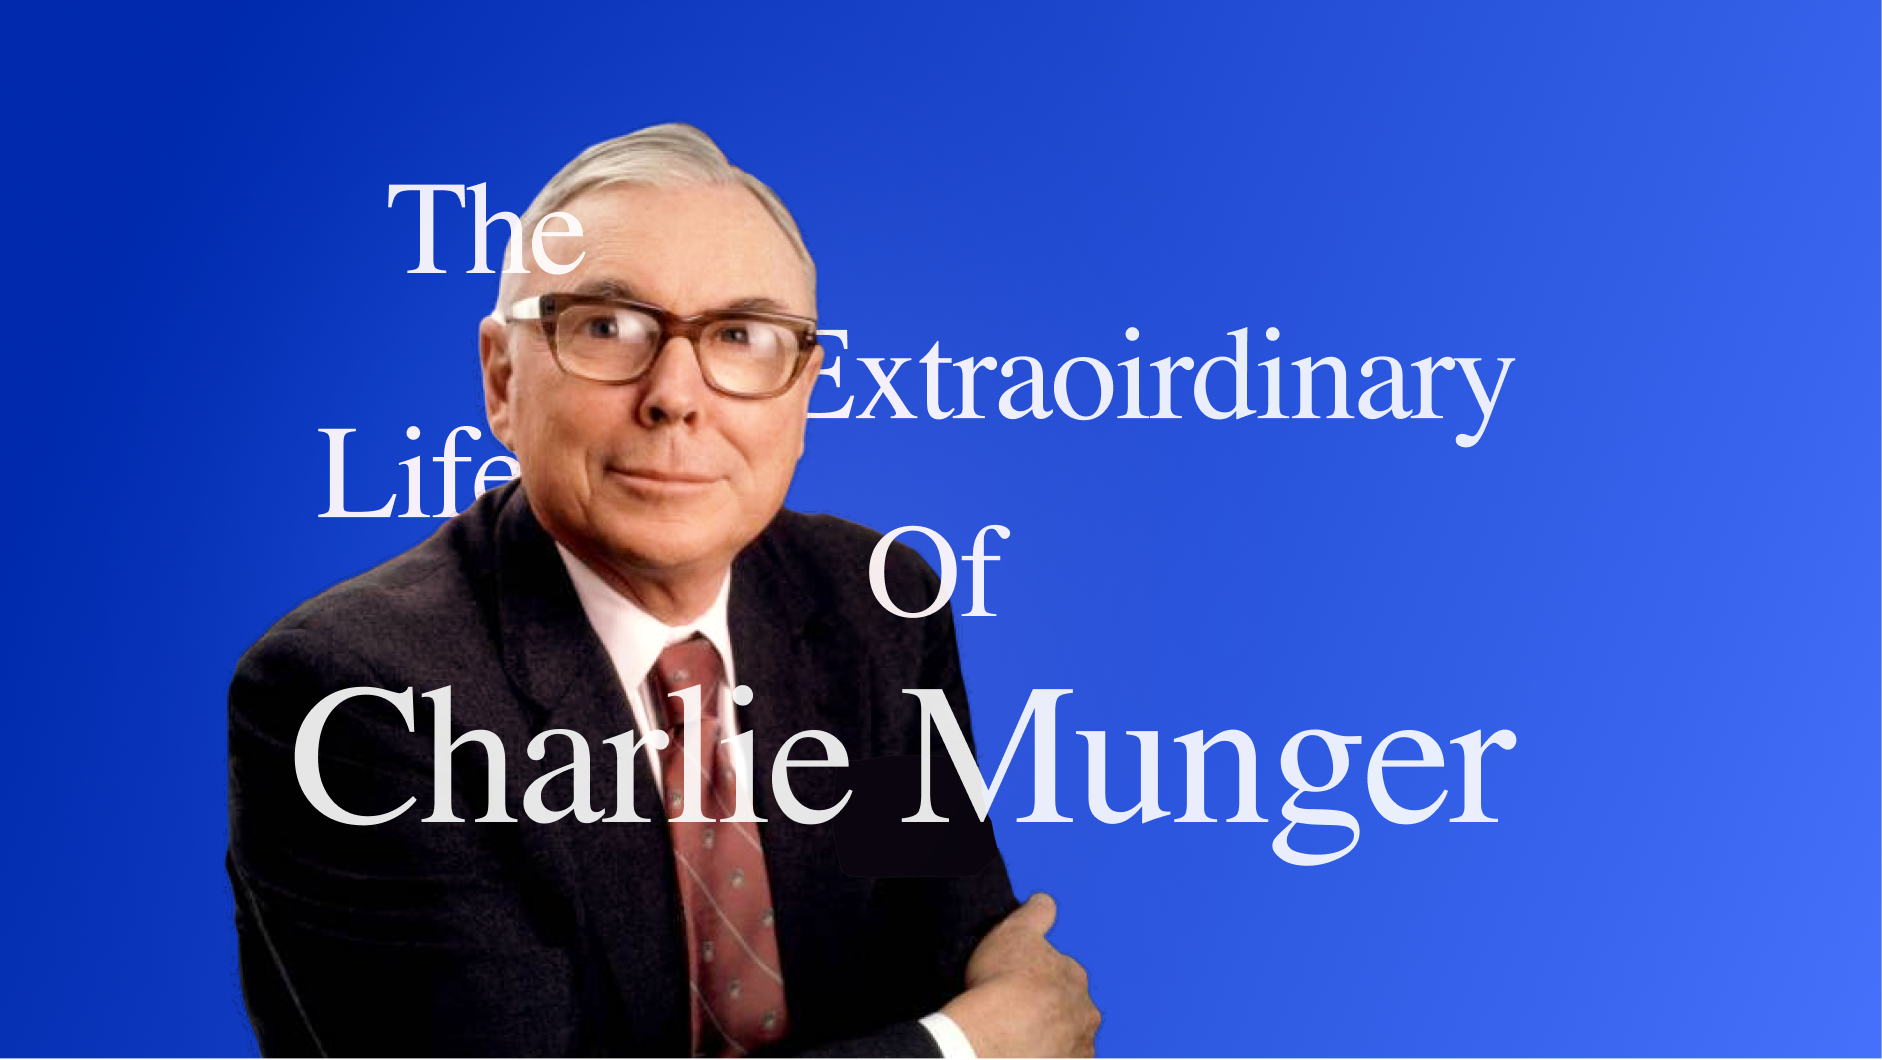 The life of Charlie Munger - Berkshire Hathaway